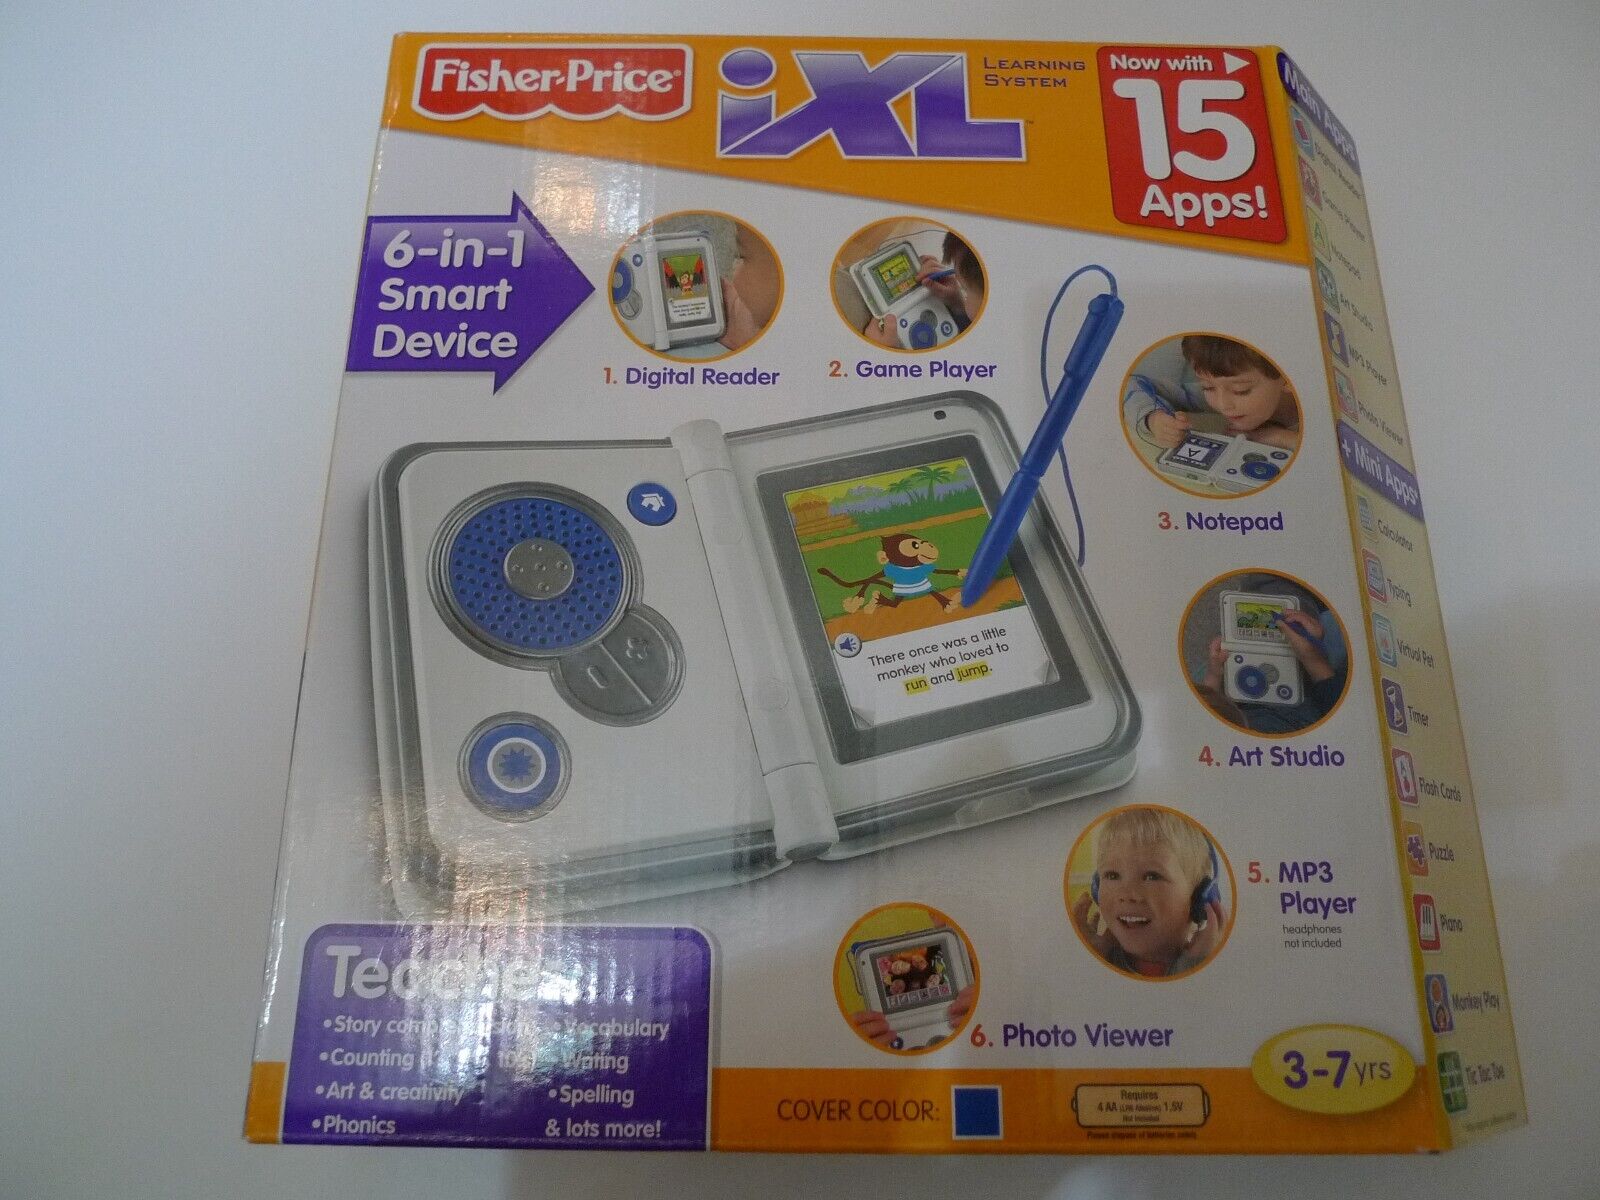 Brand NEW Fisher-Price iXL 6-in-1 Learning System BLUE digital reader MP3 player